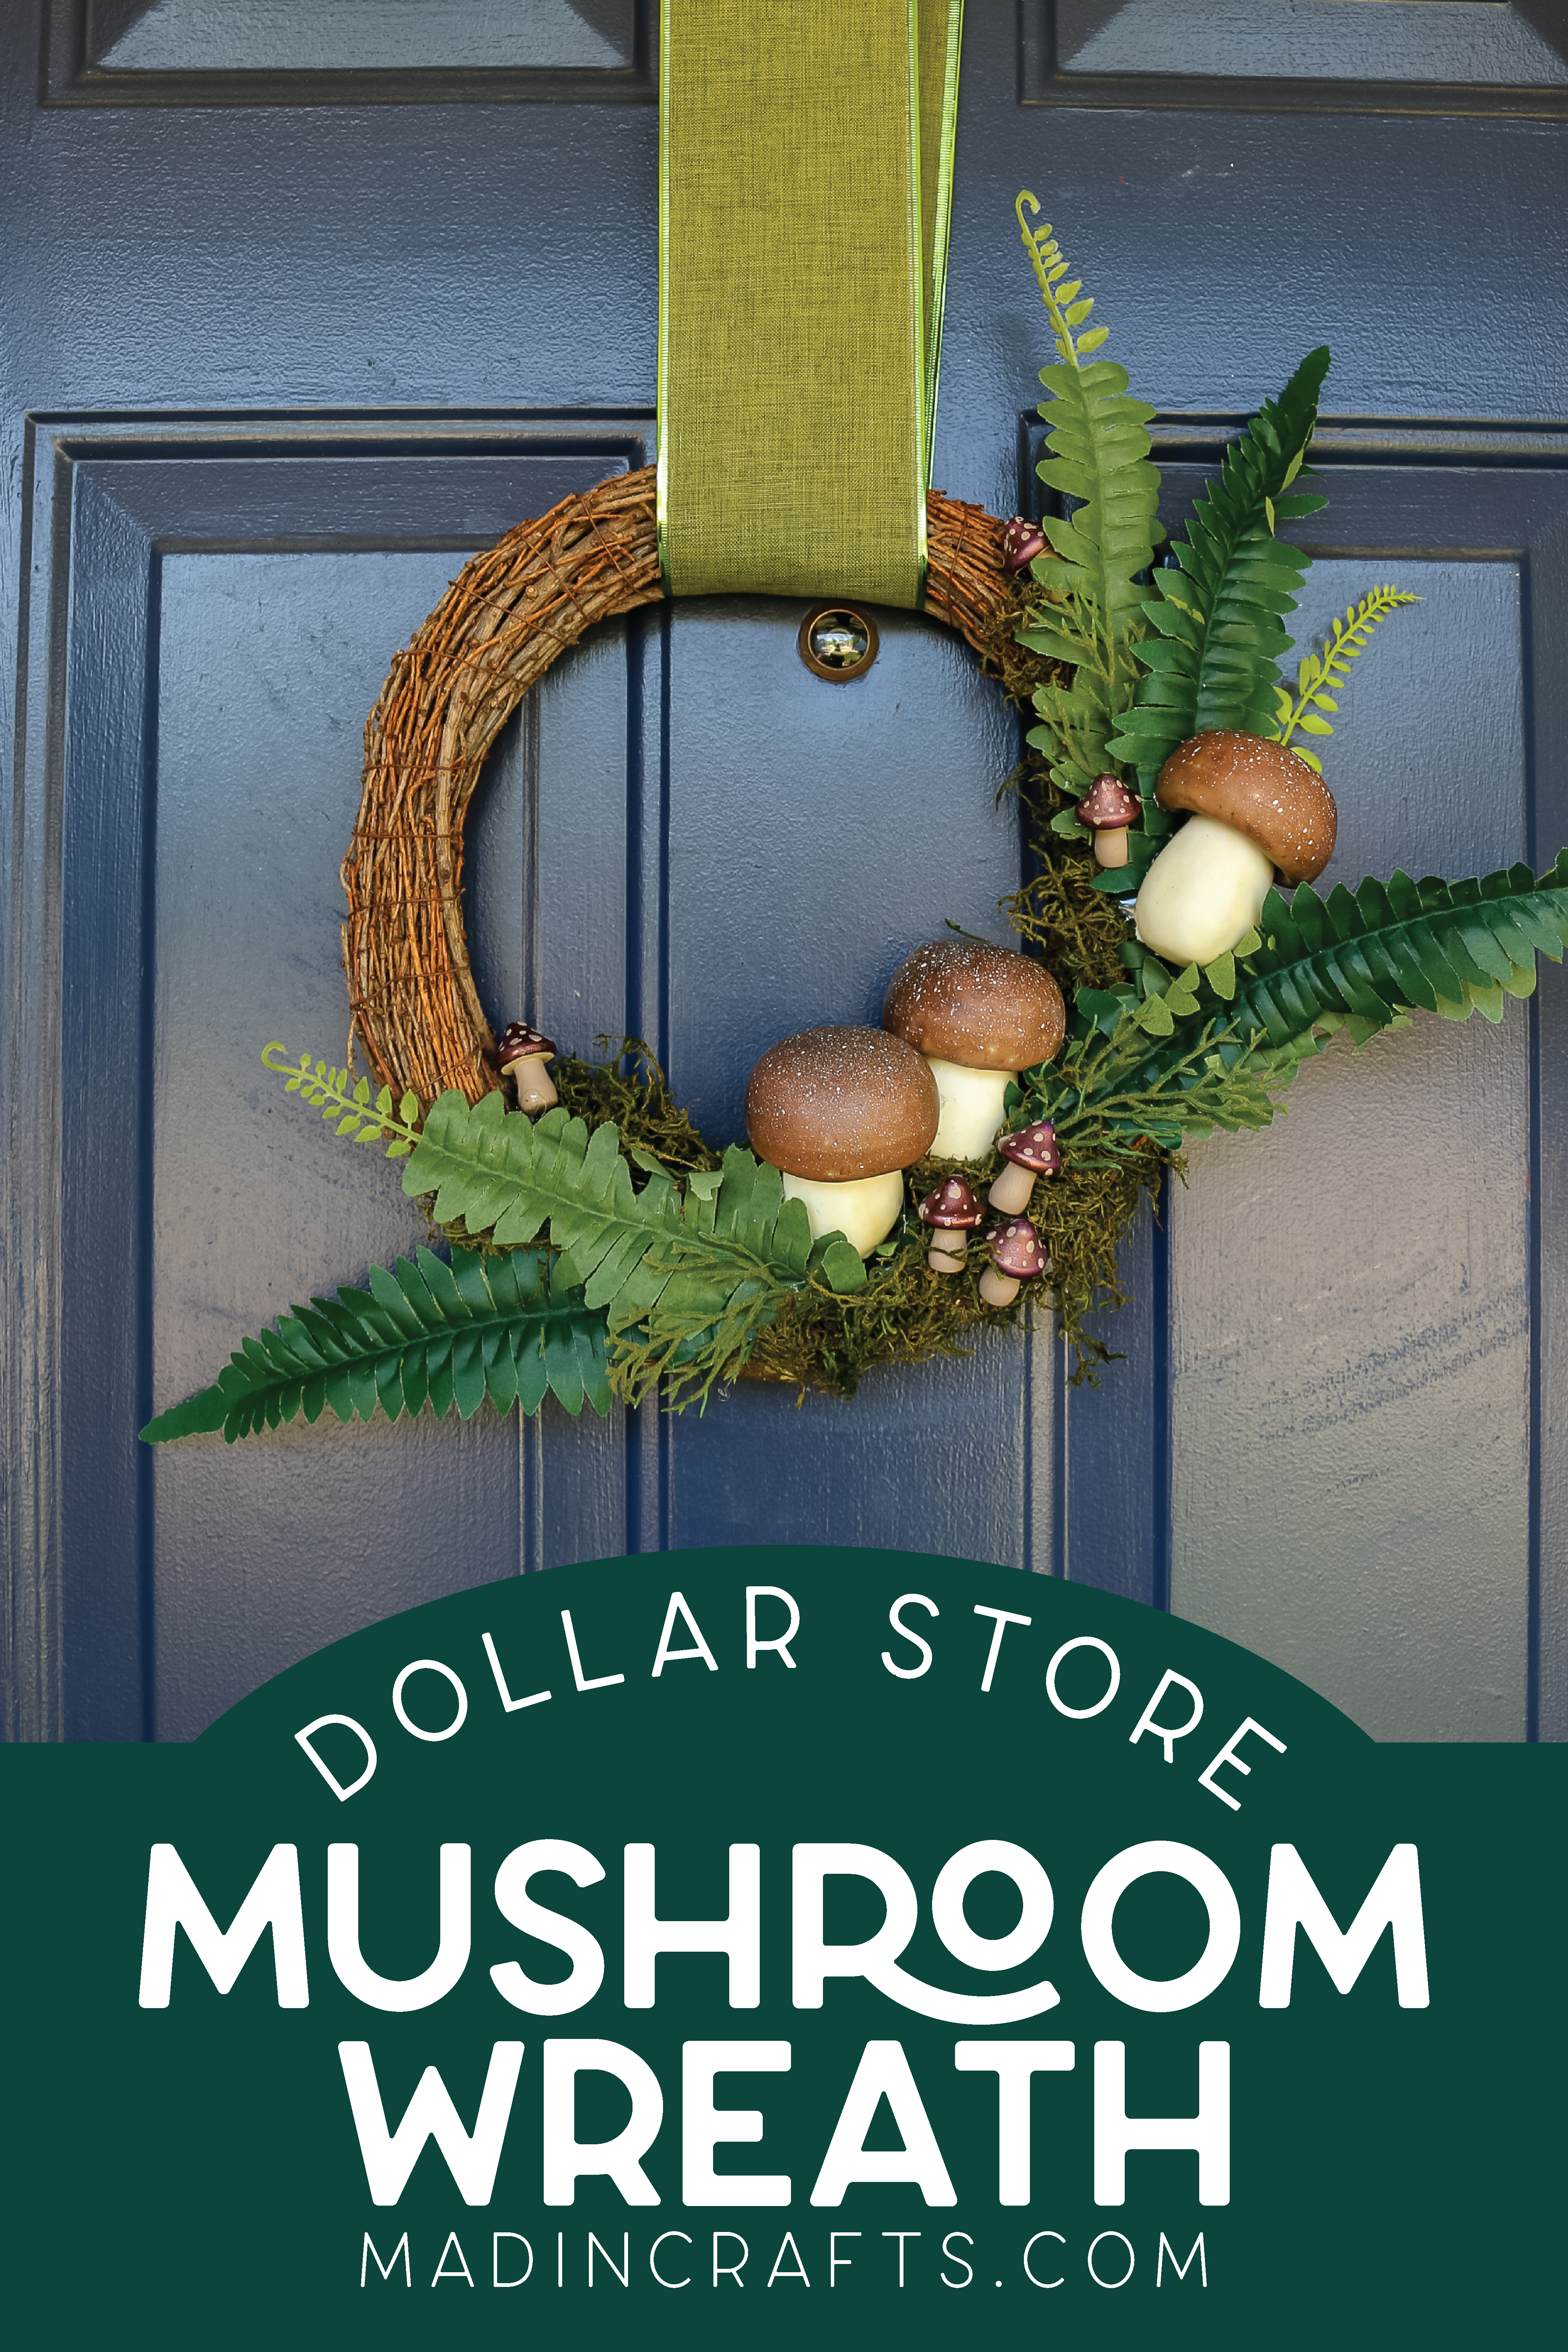 Rustic wreath decorated with mushrooms on a blue door